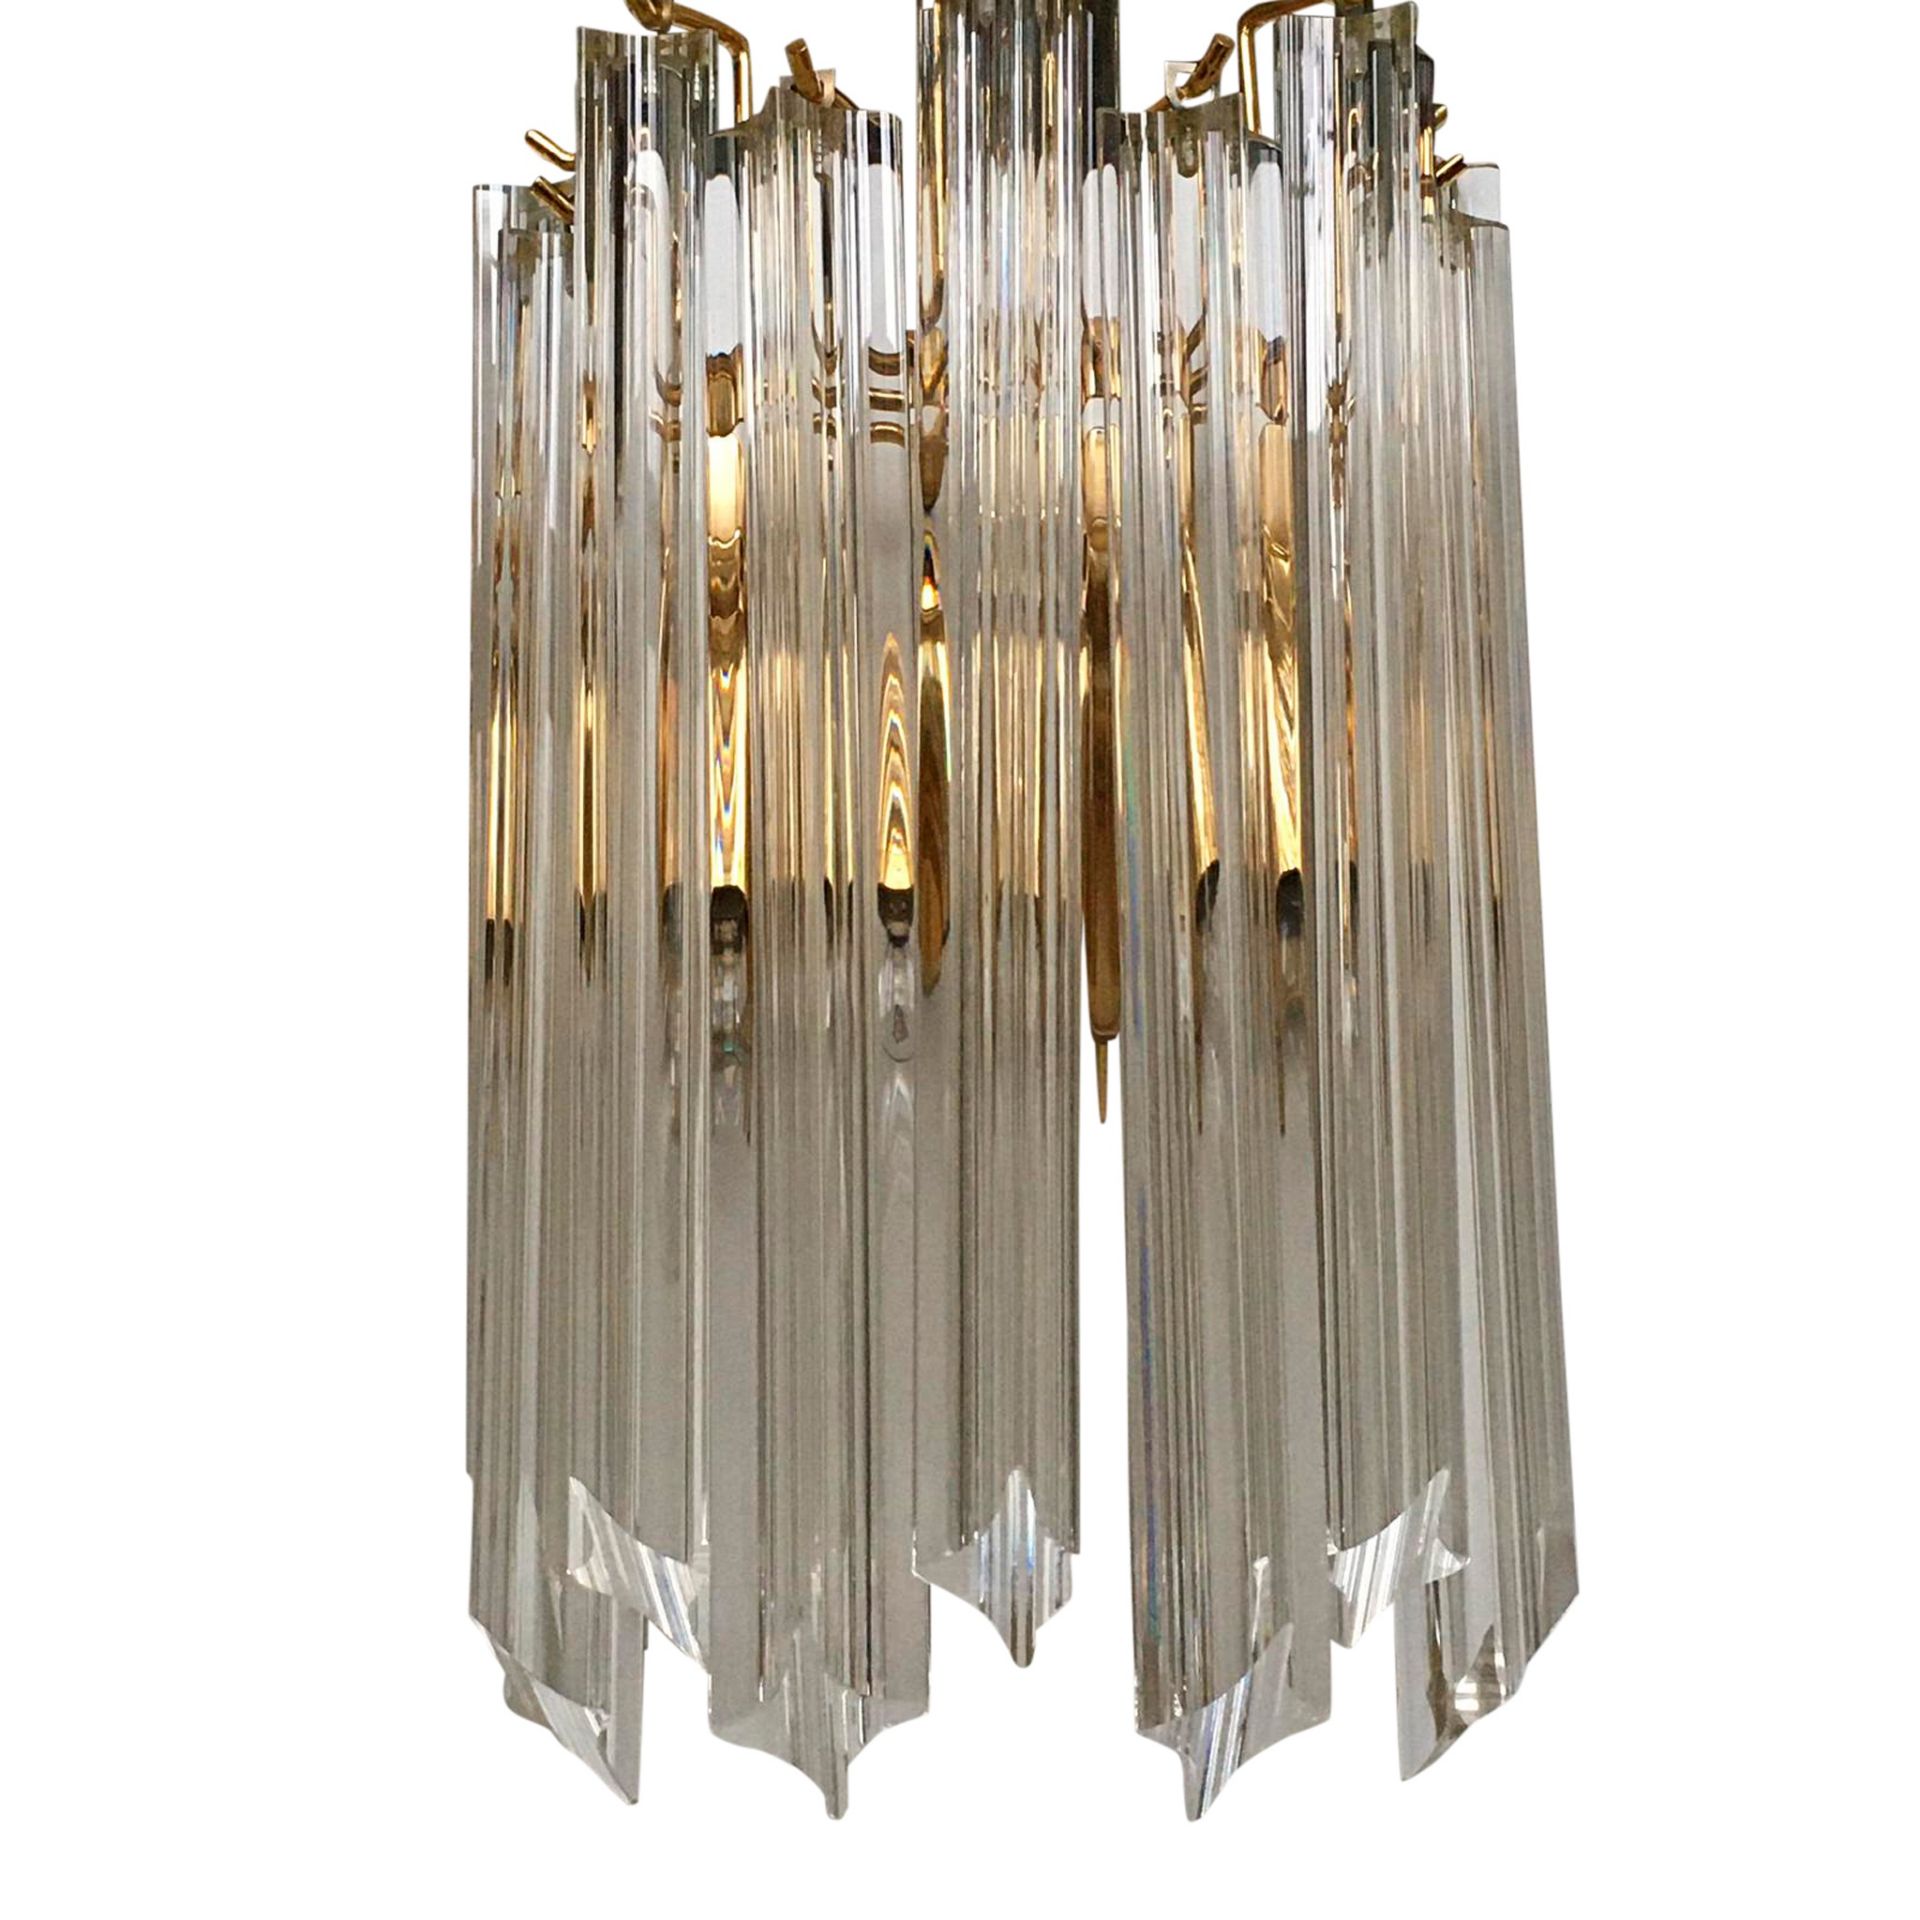 ATTRIBUTED TO VENINI, MURANO PAIR OF 'ASTRA QUADRILOBO' CRYSTAL CHANDELIERS, CIRCA 1960 - Image 2 of 4